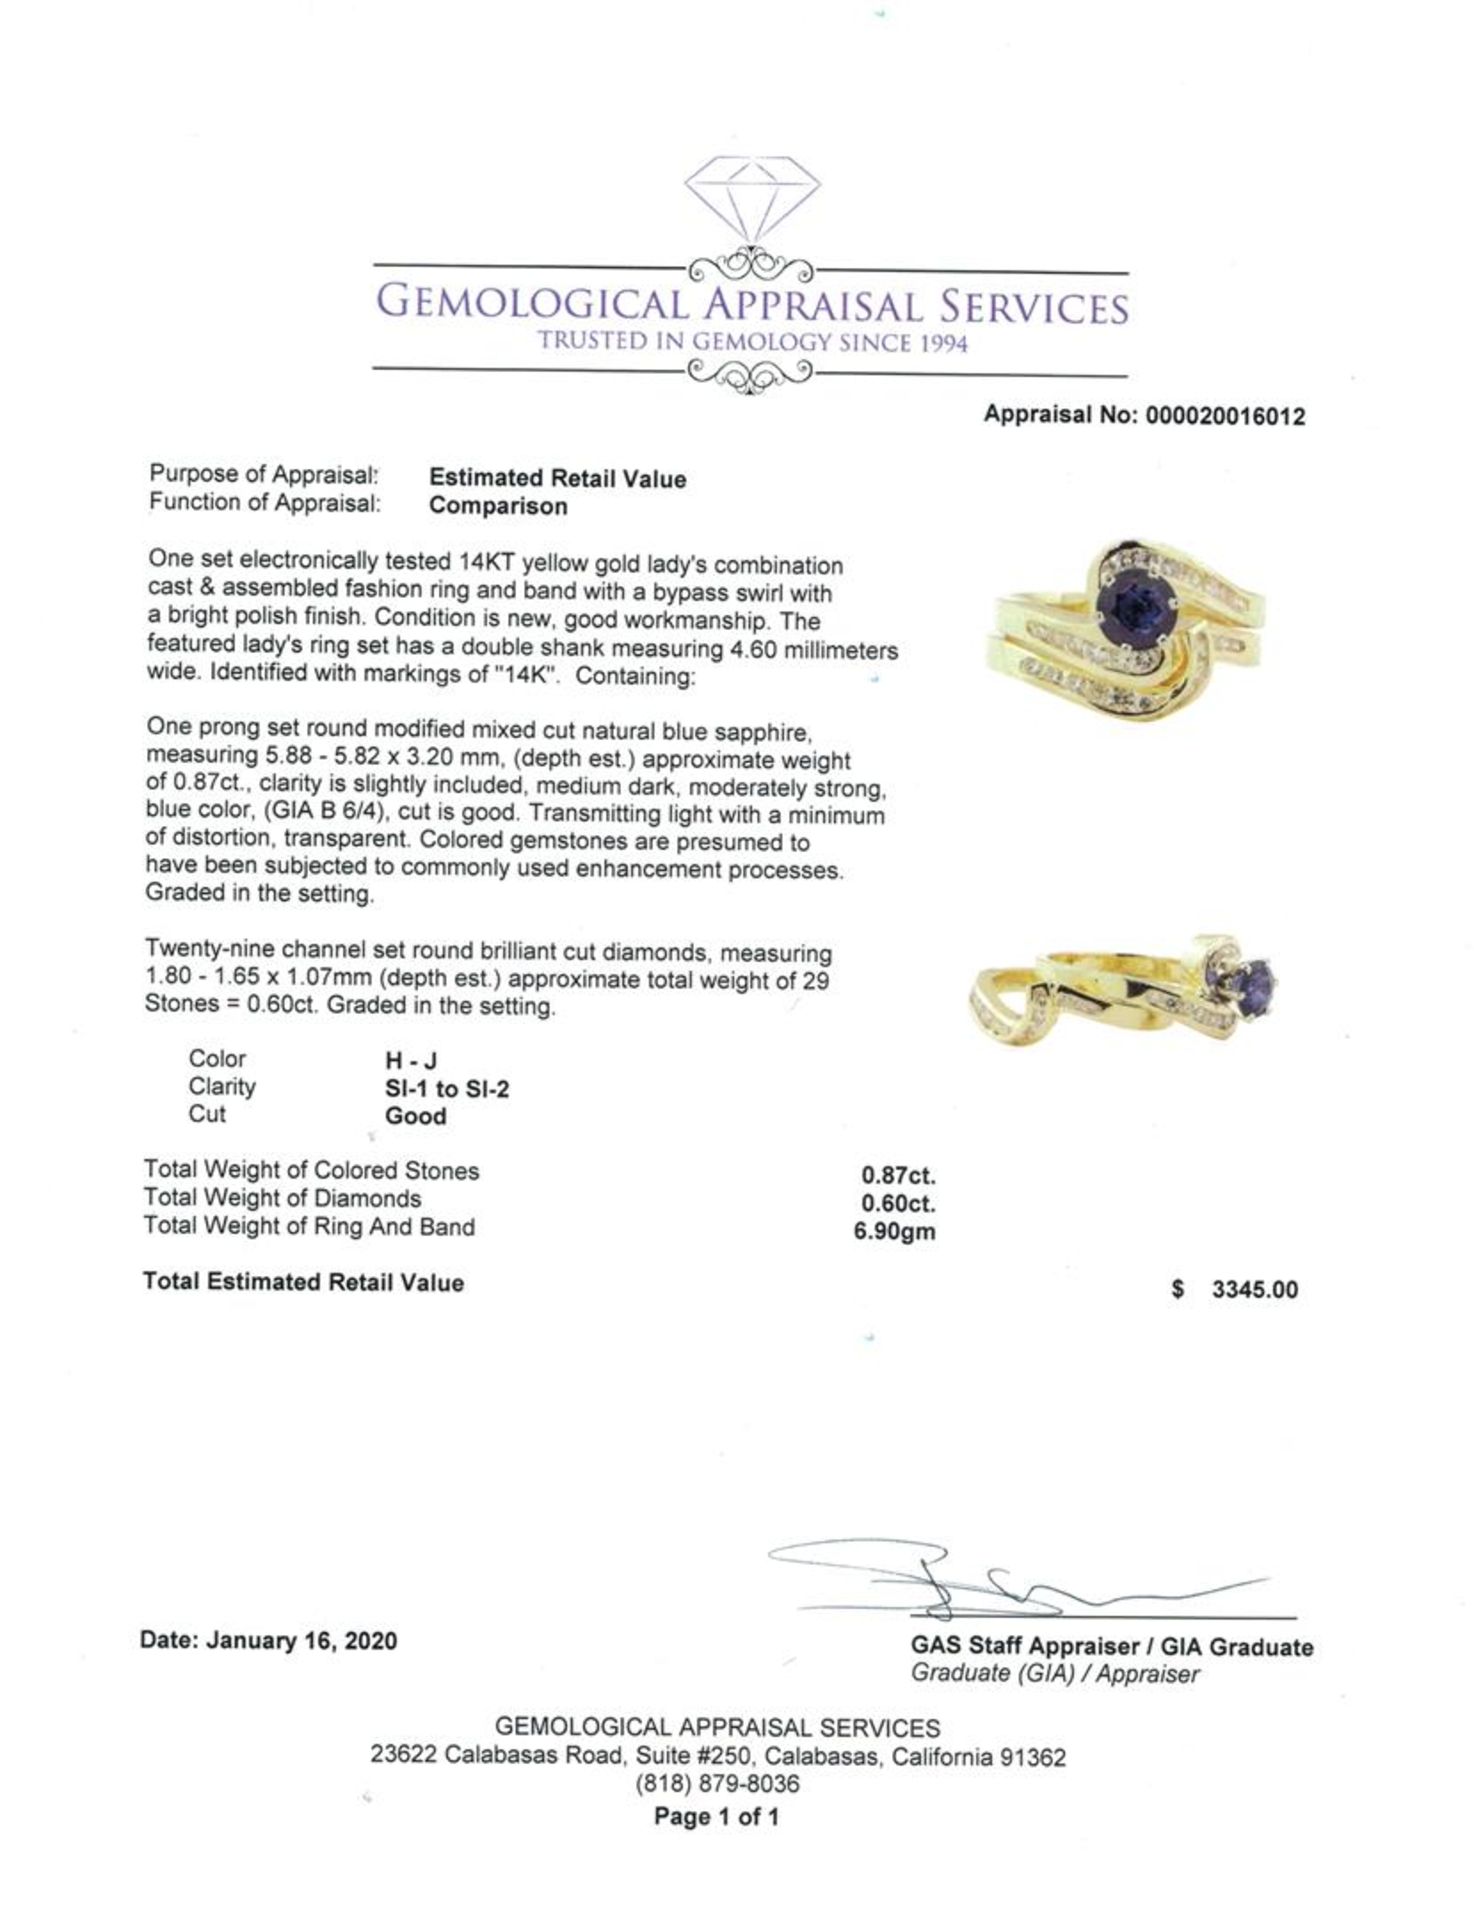 1.47 ctw Blue Sapphire And Diamond Ring And Band - 14KT Yellow Gold - Image 4 of 4